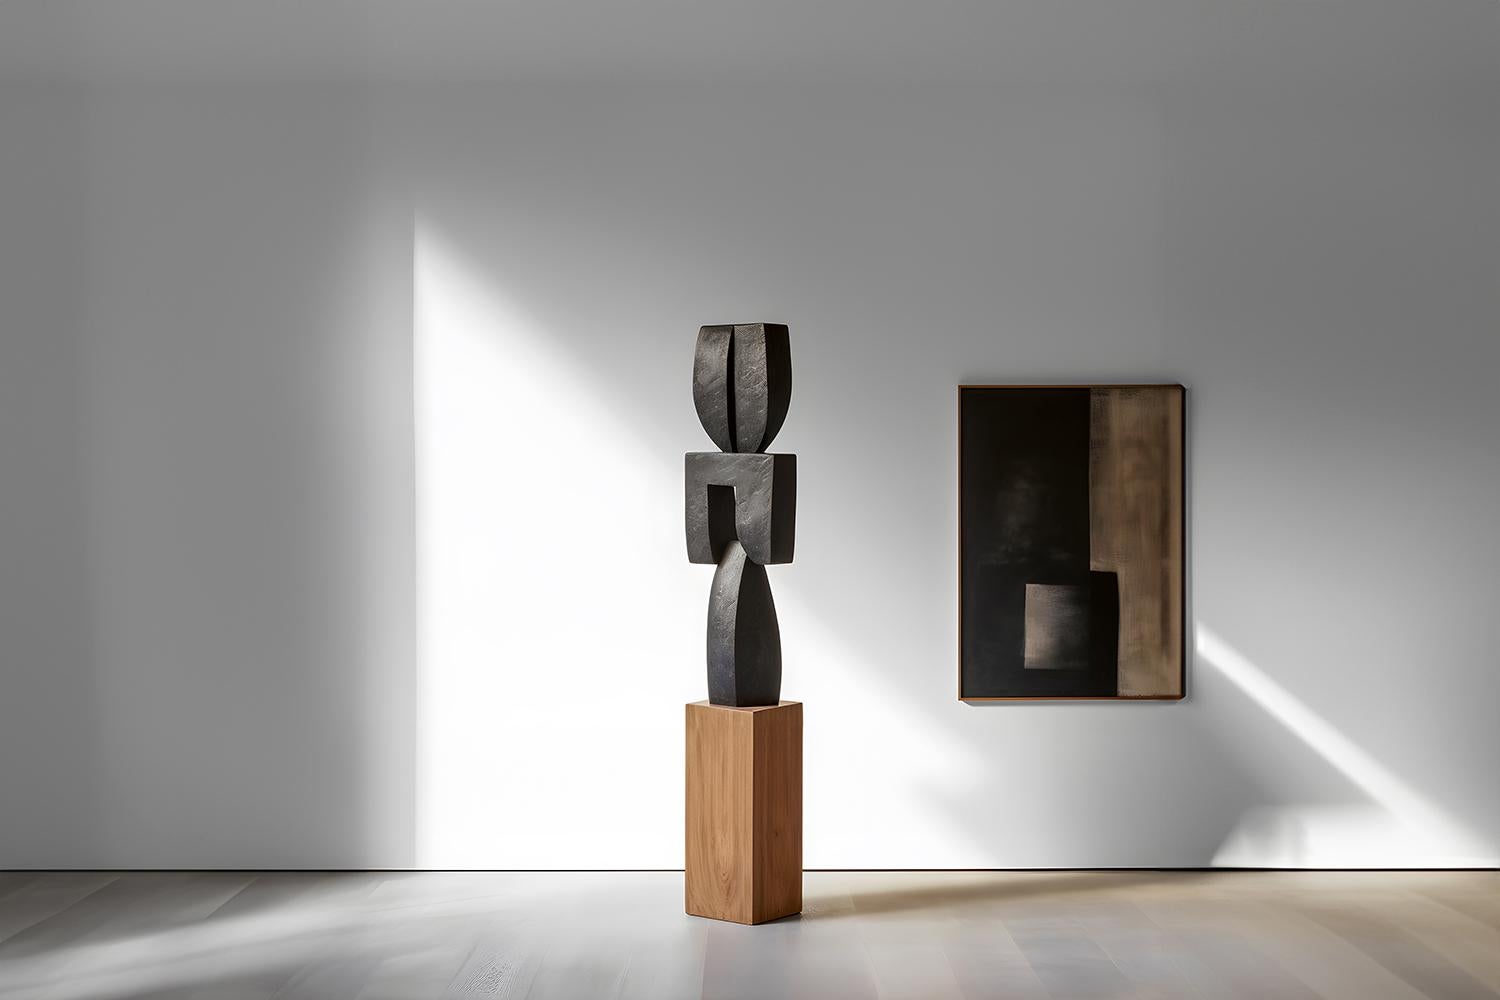 Biomorphic Carved Wood Sculpture in the style of Isamu Noguchi, Unseen Force 22 by Joel Escalona


This monolithic sculpture, designed by the talented Artist Joel Escalona, is a towering example of beauty in craftsmanship. Hand and digital machine